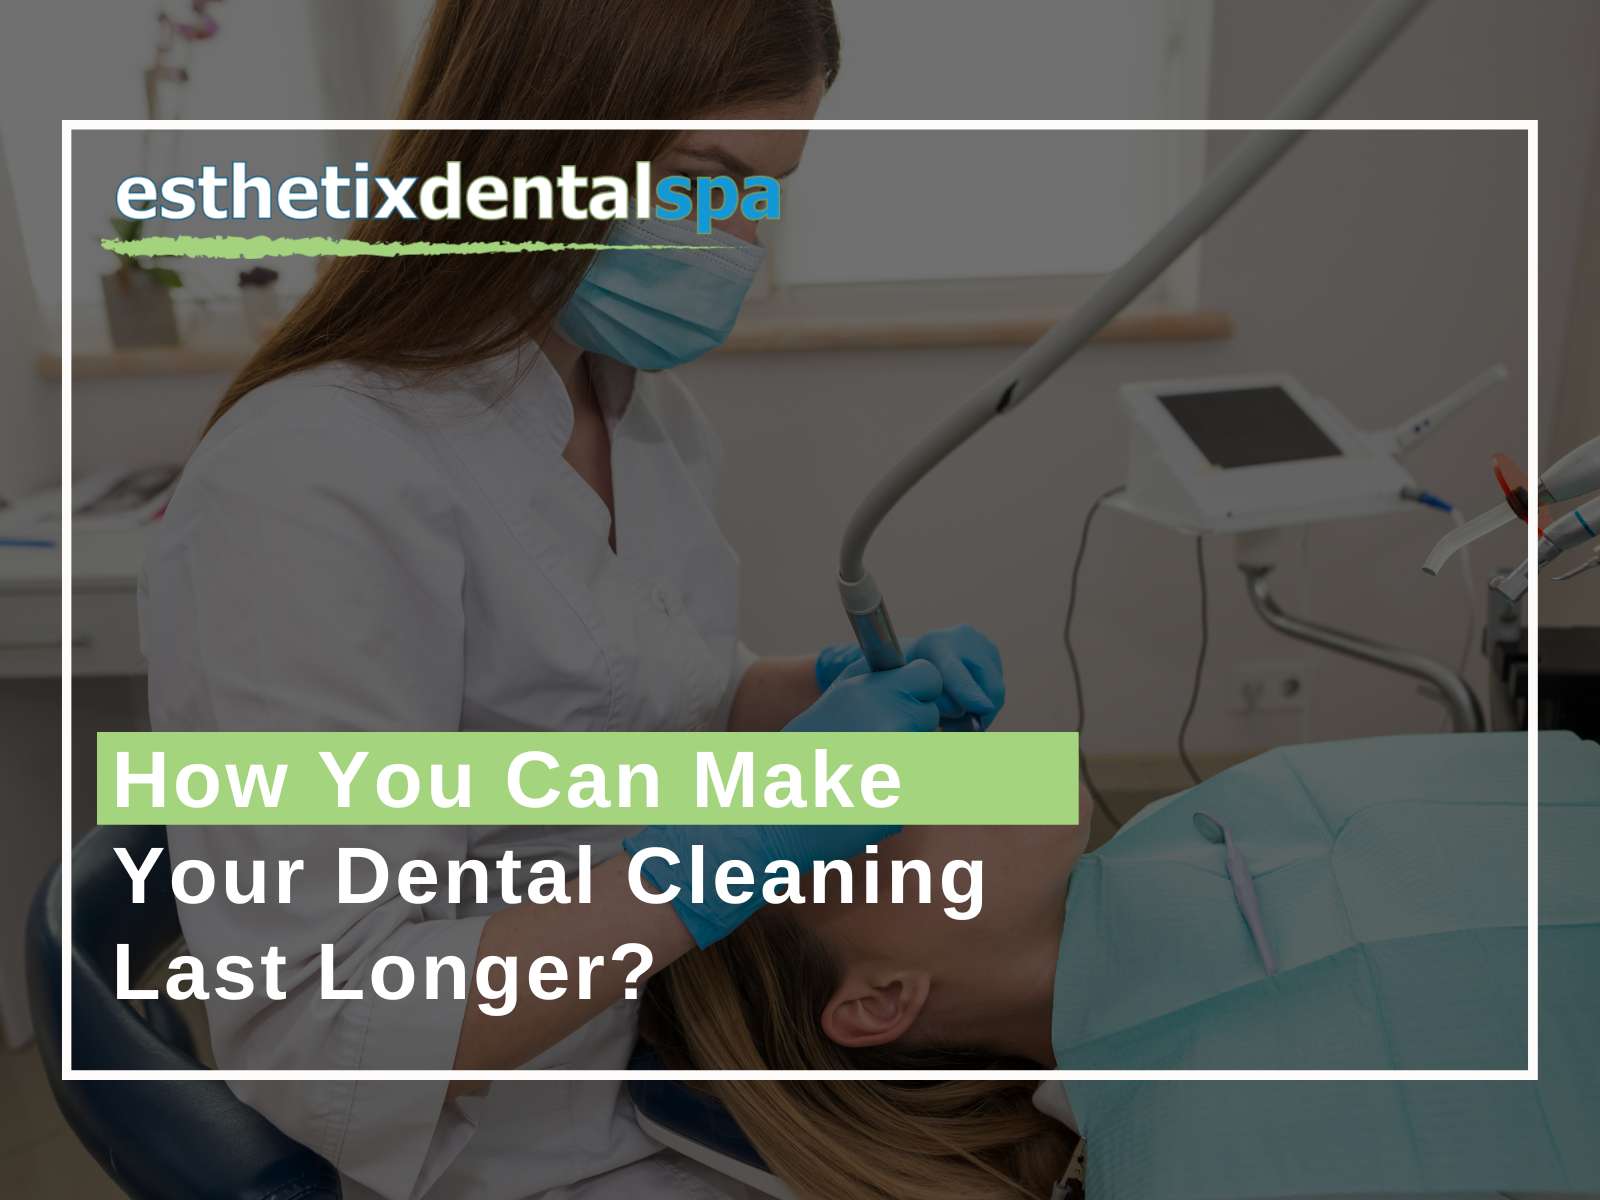 How You Can Make Your Dental Cleaning Last Longer